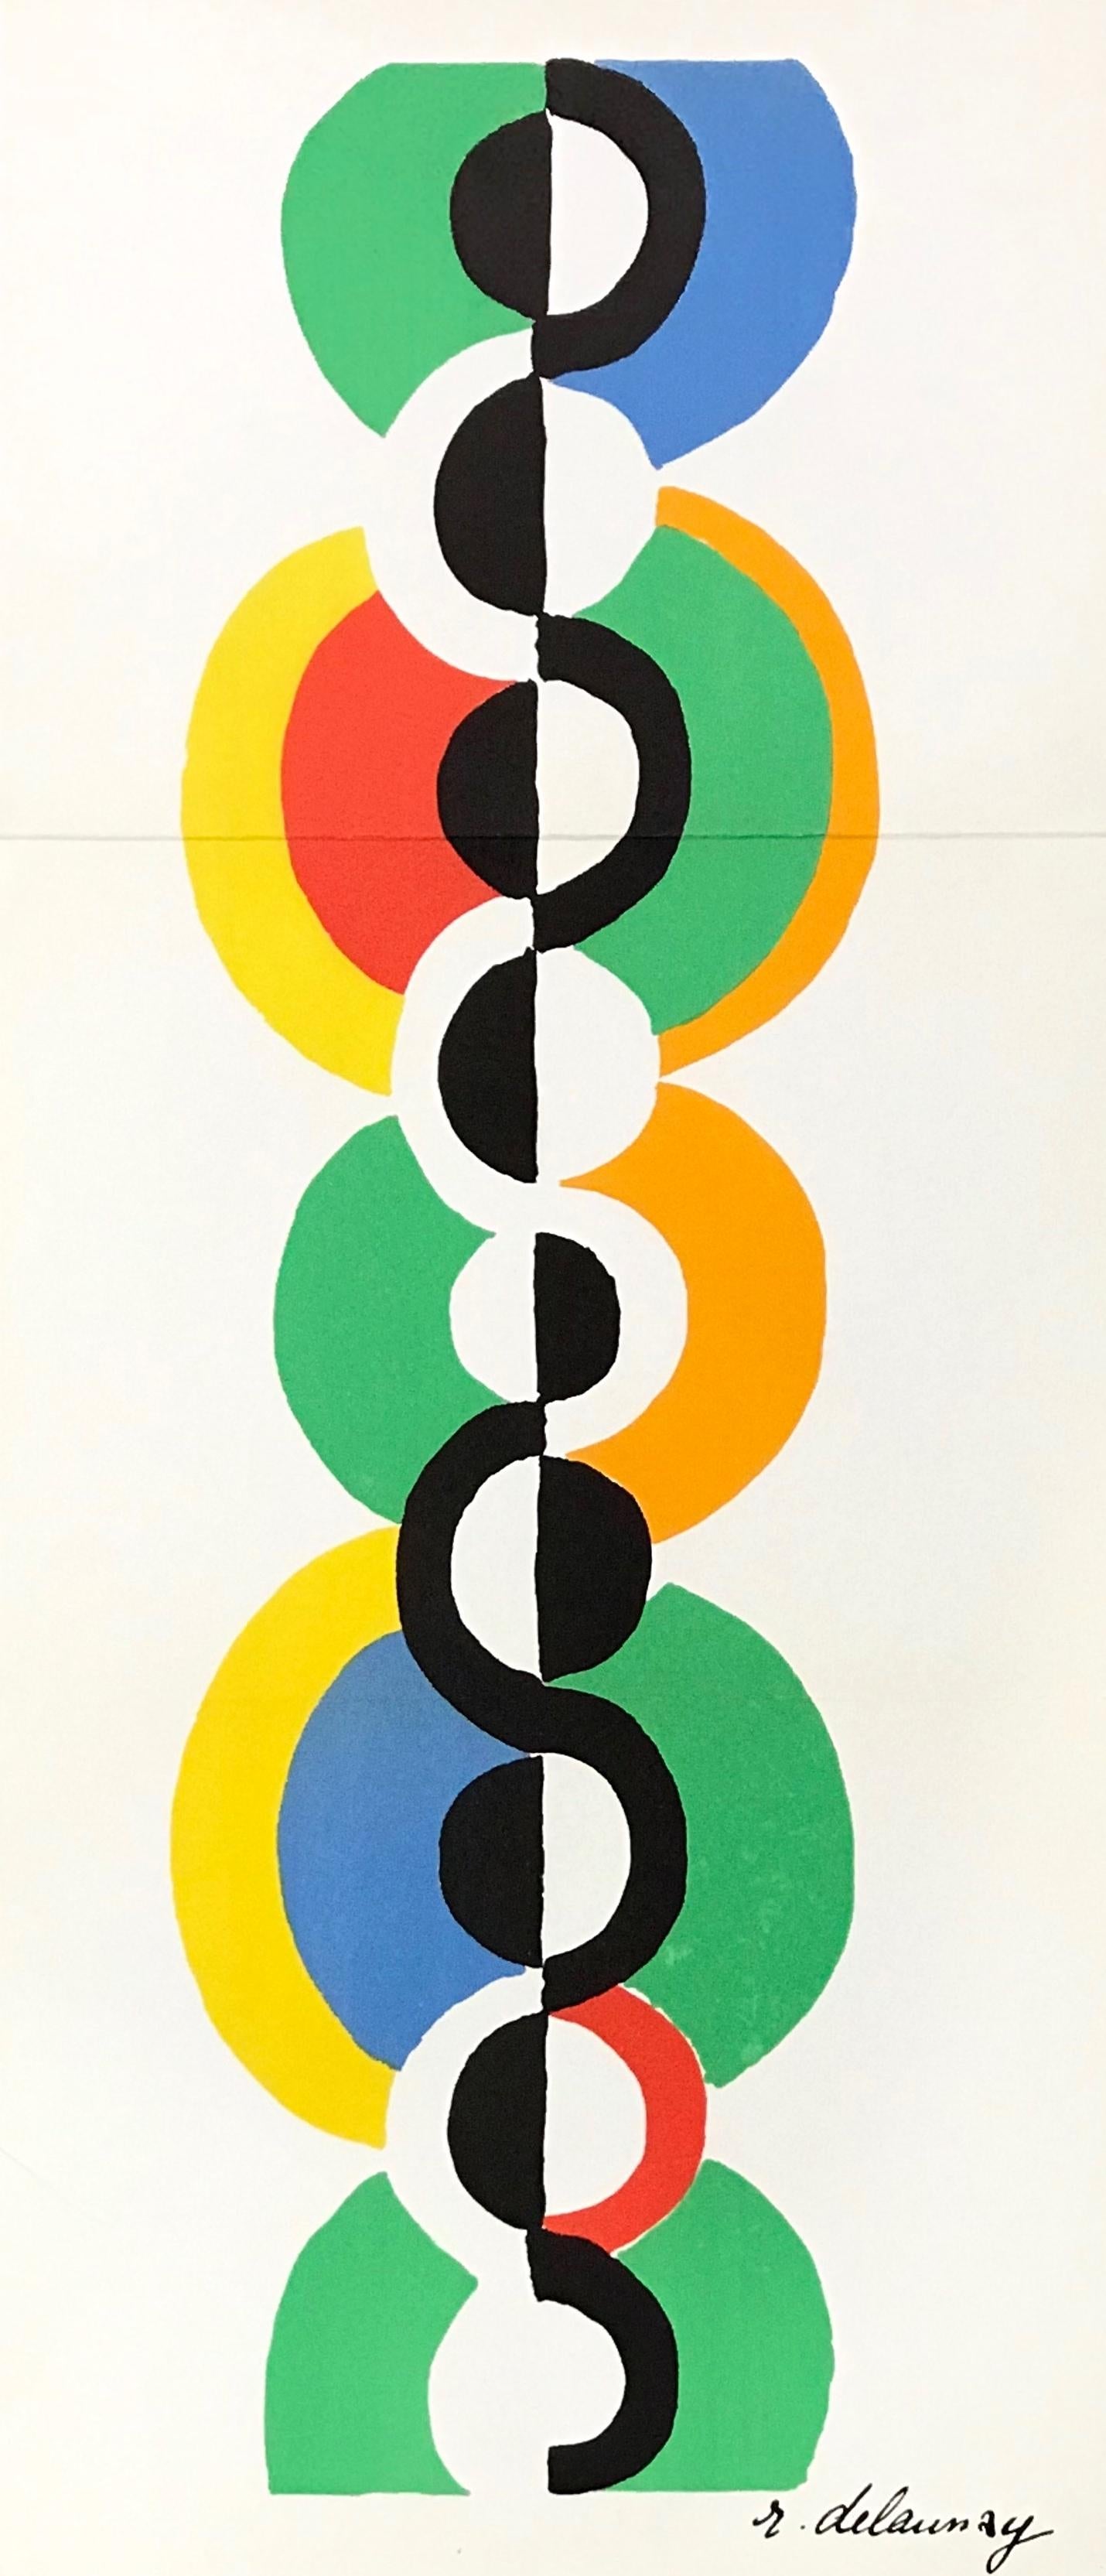 Medium: lithograph. Published in Paris in 1973 by Jacques Damase as a special loose insert for a rare exhibition catalogue. Size: 31 x 13 3/4 inches (795 x 350 mm). Signed in the plate (not by hand). 

Condition: This lithograph was issued as a